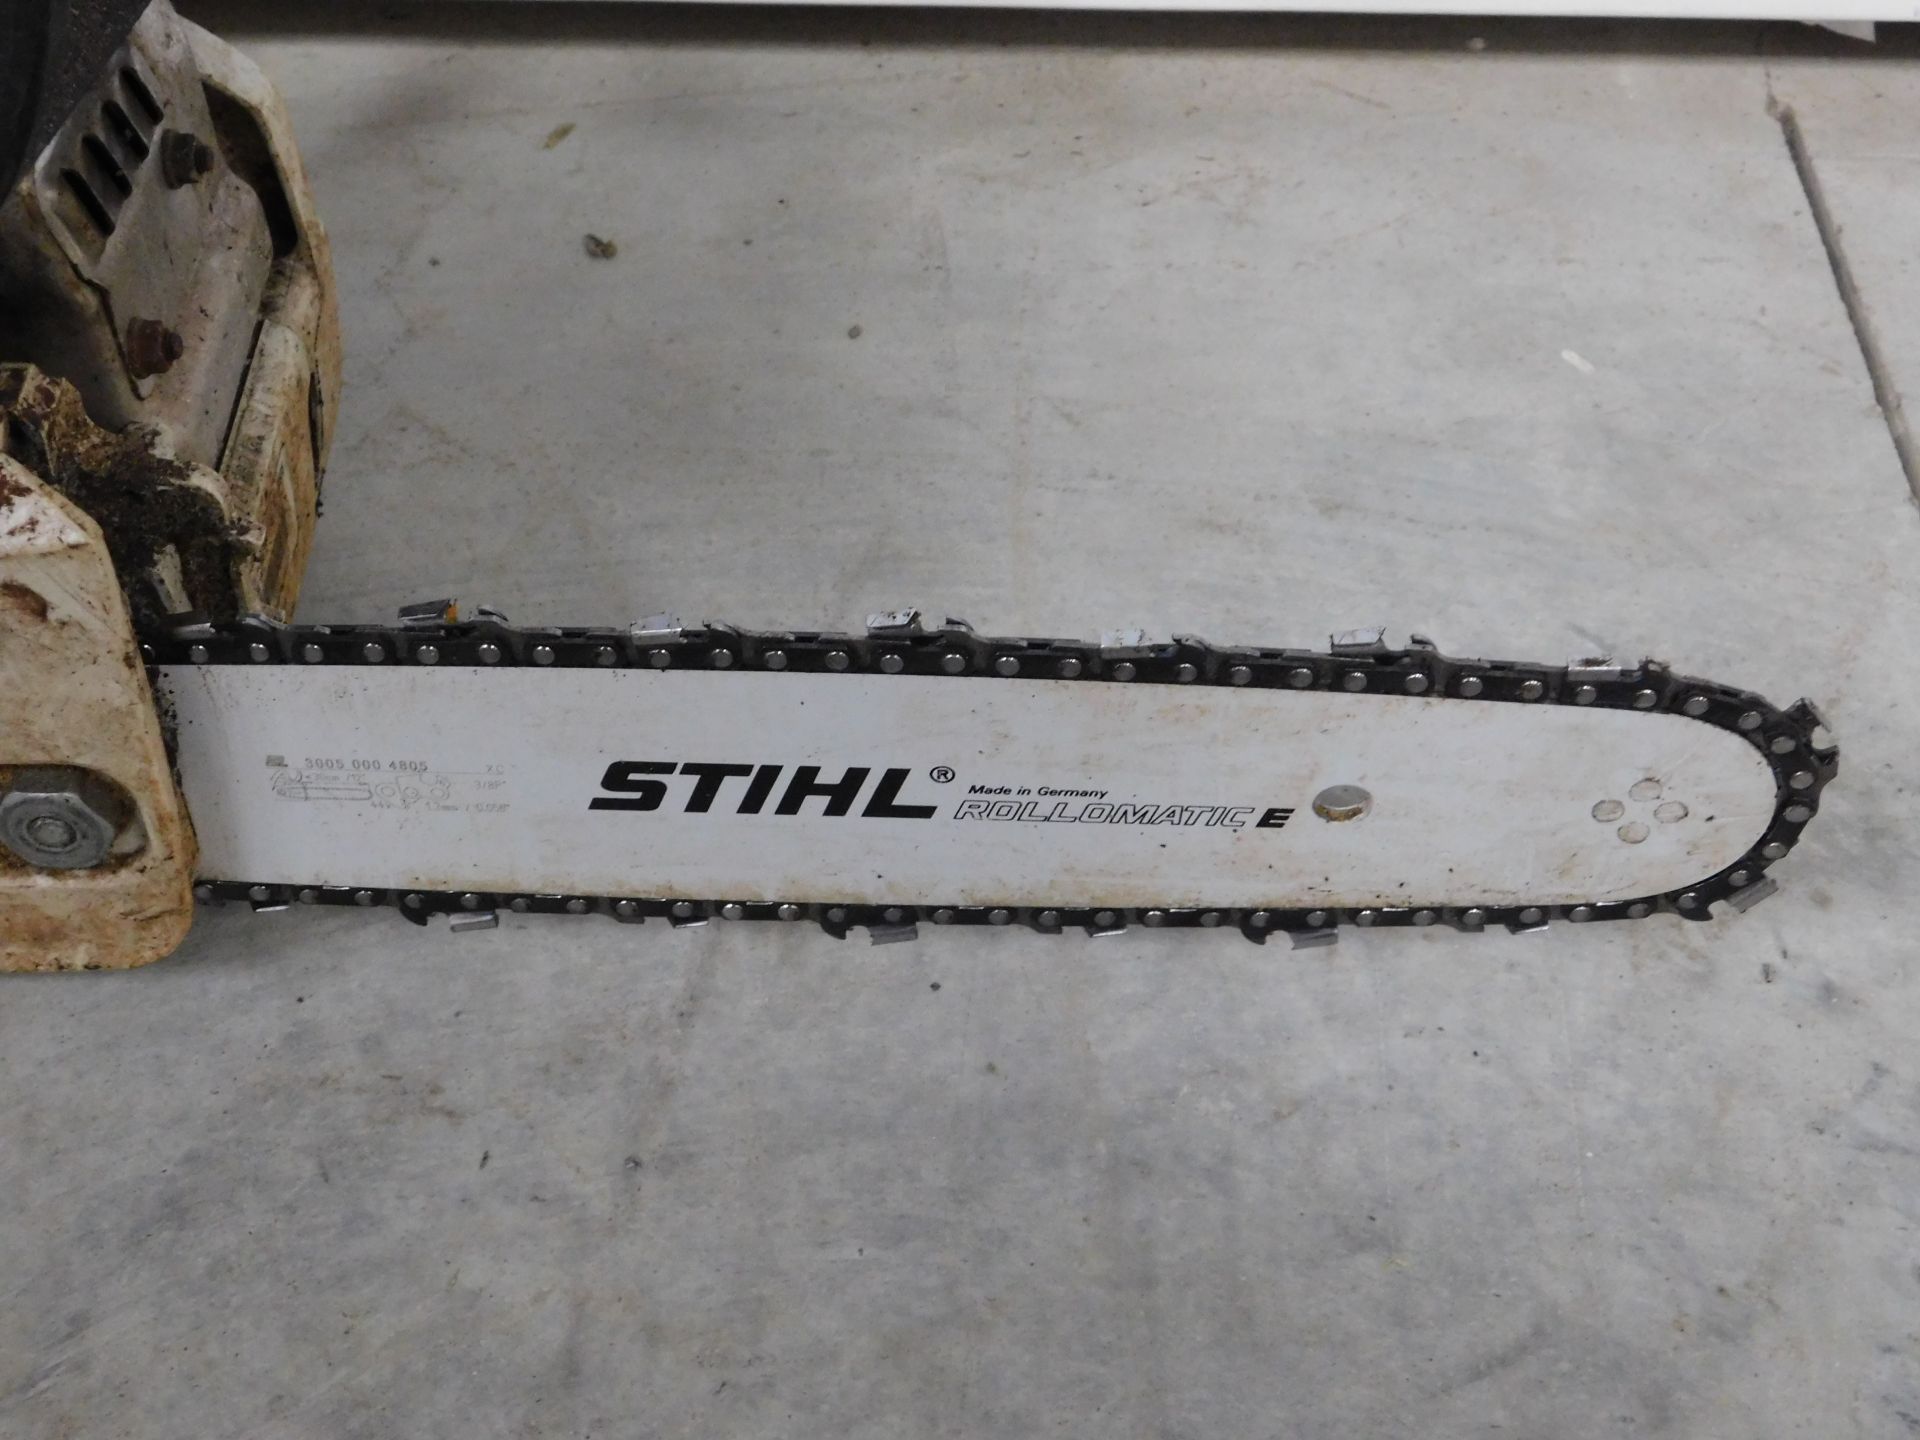 Stihl MS 180 Petrol Chainsaw (Location Brentwood. Please Refer to General Notes) - Image 2 of 3